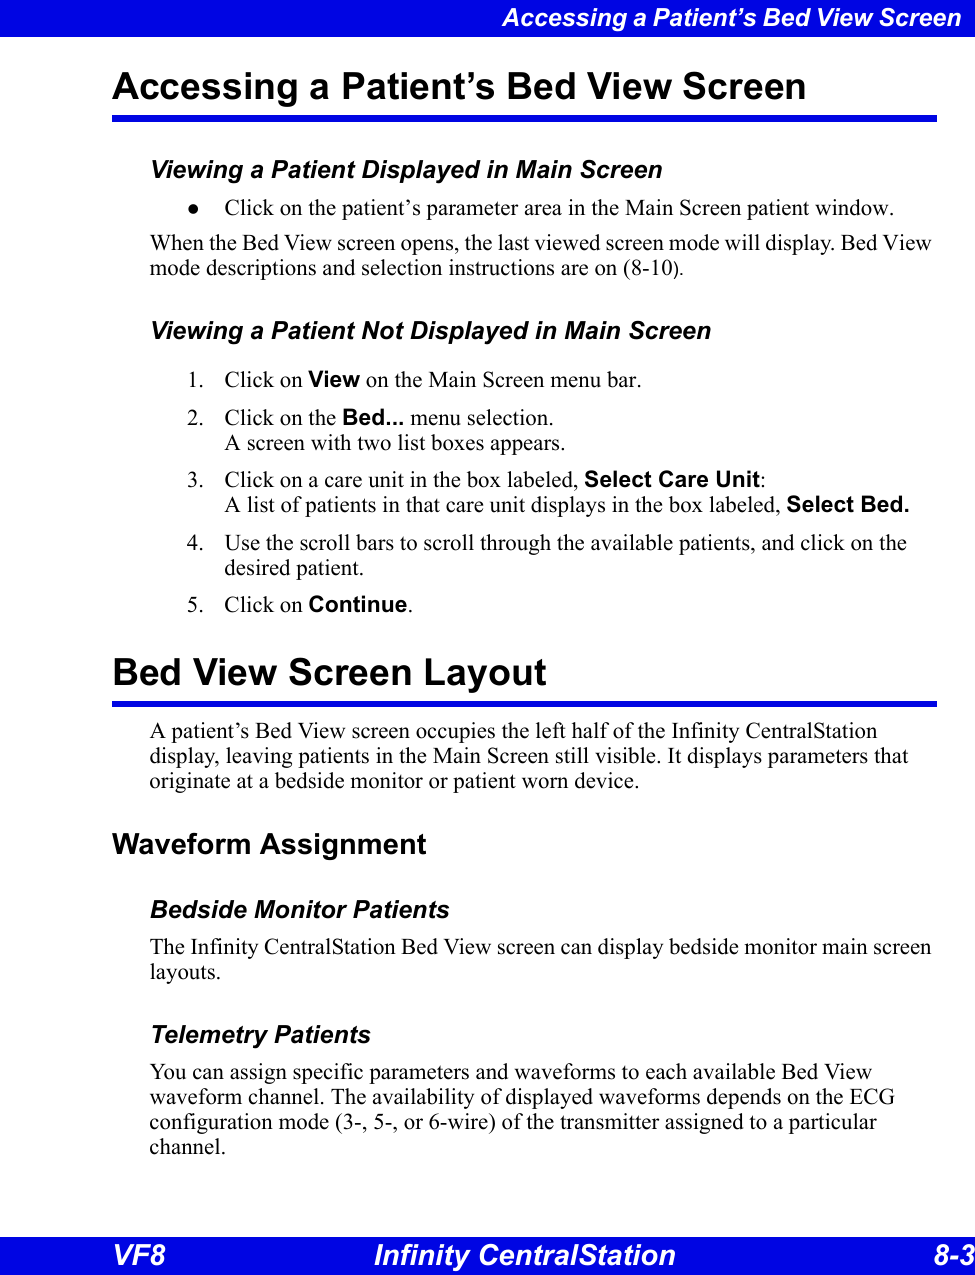 Accessing a Patient’s Bed View Screen VF8 Infinity CentralStation 8-3 Accessing a Patient’s Bed View ScreenViewing a Patient Displayed in Main ScreenzClick on the patient’s parameter area in the Main Screen patient window.When the Bed View screen opens, the last viewed screen mode will display. Bed View mode descriptions and selection instructions are on (8-10).Viewing a Patient Not Displayed in Main Screen1. Click on View on the Main Screen menu bar. 2. Click on the Bed... menu selection. A screen with two list boxes appears. 3. Click on a care unit in the box labeled, Select Care Unit: A list of patients in that care unit displays in the box labeled, Select Bed. 4. Use the scroll bars to scroll through the available patients, and click on the desired patient.5. Click on Continue.Bed View Screen LayoutA patient’s Bed View screen occupies the left half of the Infinity CentralStation display, leaving patients in the Main Screen still visible. It displays parameters that originate at a bedside monitor or patient worn device. Waveform AssignmentBedside Monitor PatientsThe Infinity CentralStation Bed View screen can display bedside monitor main screen layouts. Telemetry PatientsYou can assign specific parameters and waveforms to each available Bed View waveform channel. The availability of displayed waveforms depends on the ECG configuration mode (3-, 5-, or 6-wire) of the transmitter assigned to a particular channel.